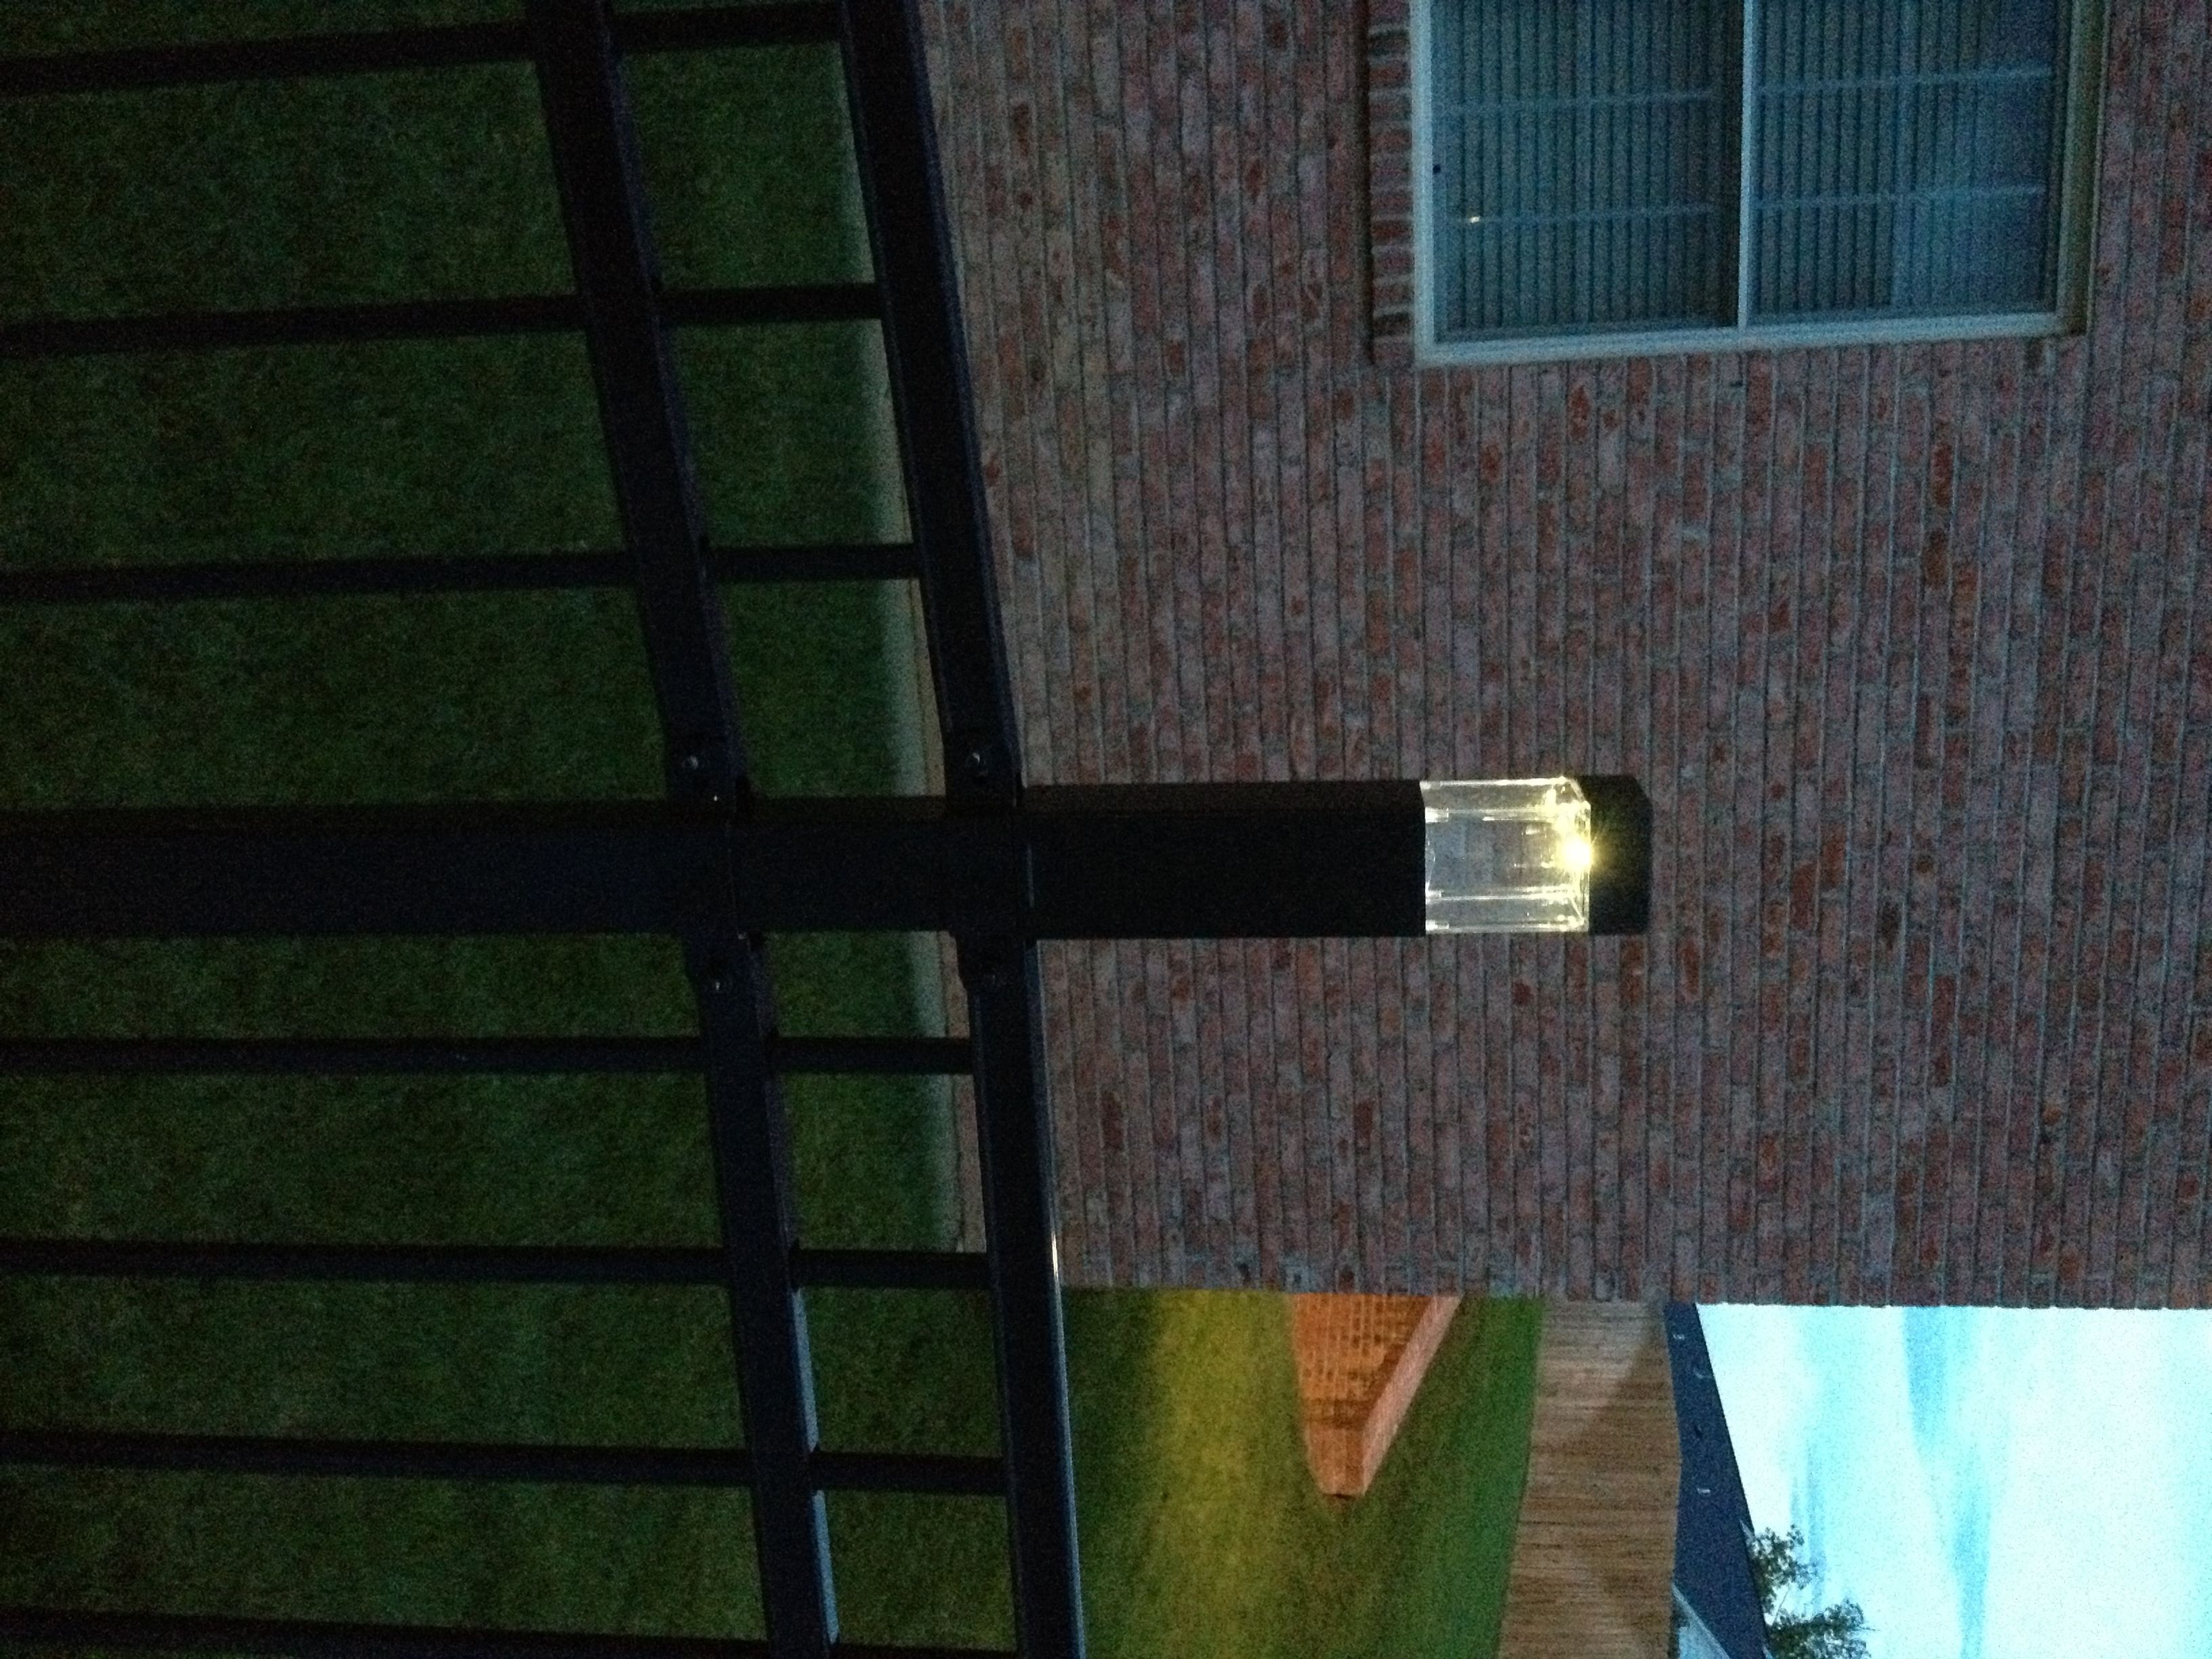 Contemporary Solar Driveway Lights At Target Within Fashionable Diy Fence Post Lights. $3 Solar Lights From Target (View 20 of 20)